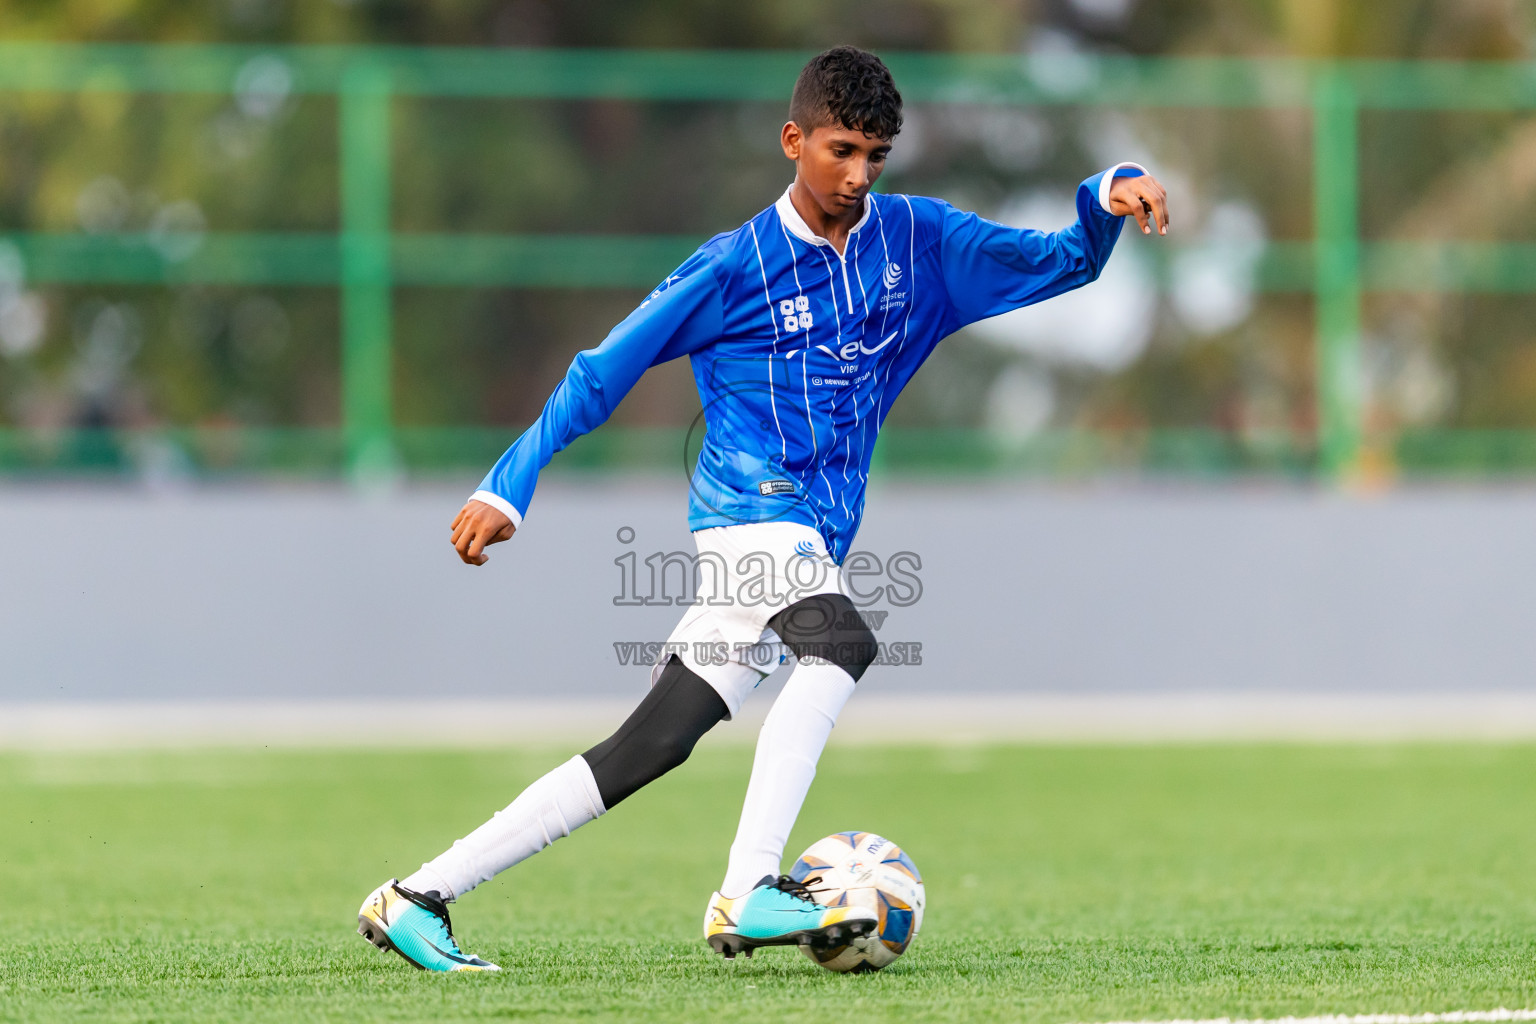 Furious FC vs Chester Academy from Manadhoo Council Cup 2024 in N Manadhoo Maldives on Thursday, 22nd February 2023. Photos: Nausham Waheed / images.mv